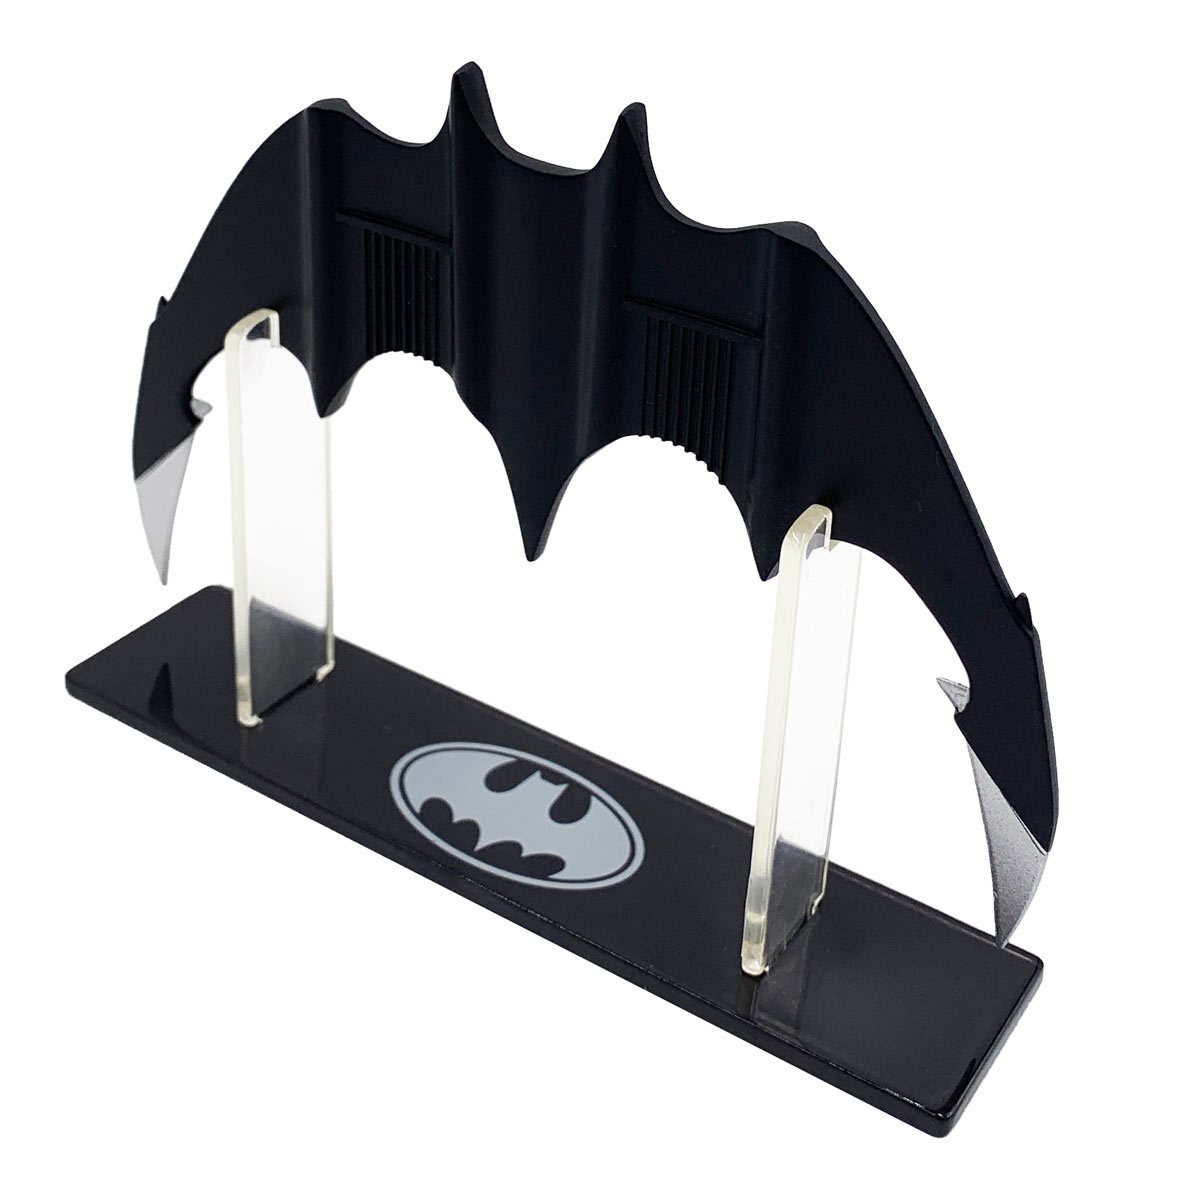 Batman 1989 Batarang Scaled Prop Replica Gifts Ivy and Pearl Boutique   